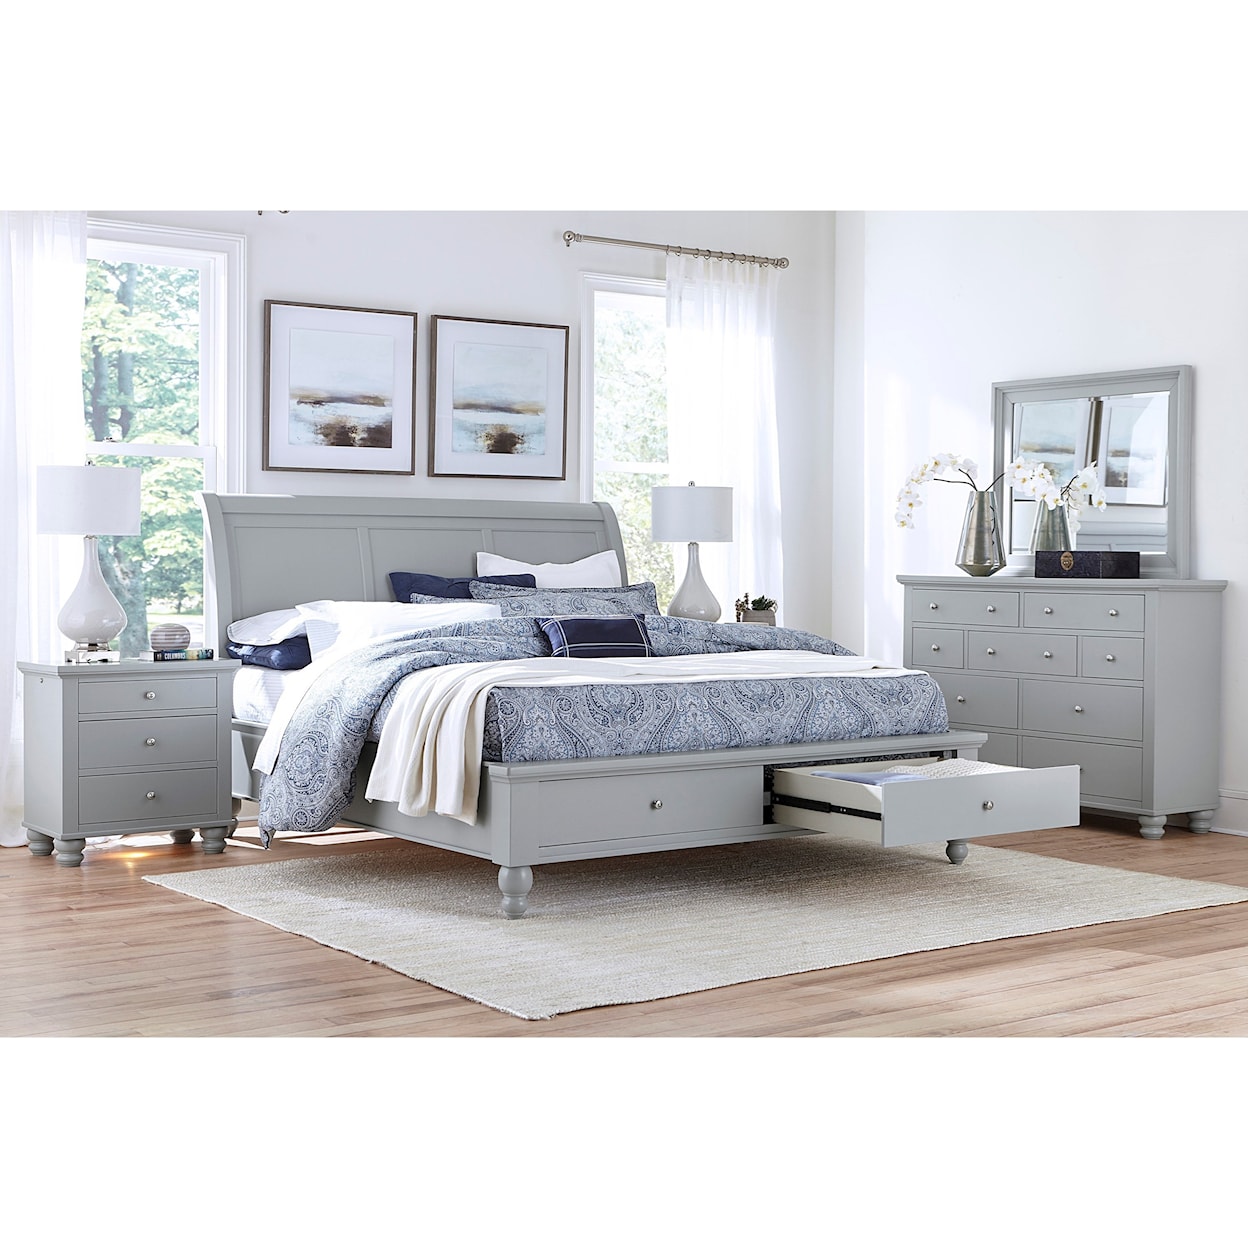 Aspenhome Clinton Queen Sleigh Bed With Storage Drawers